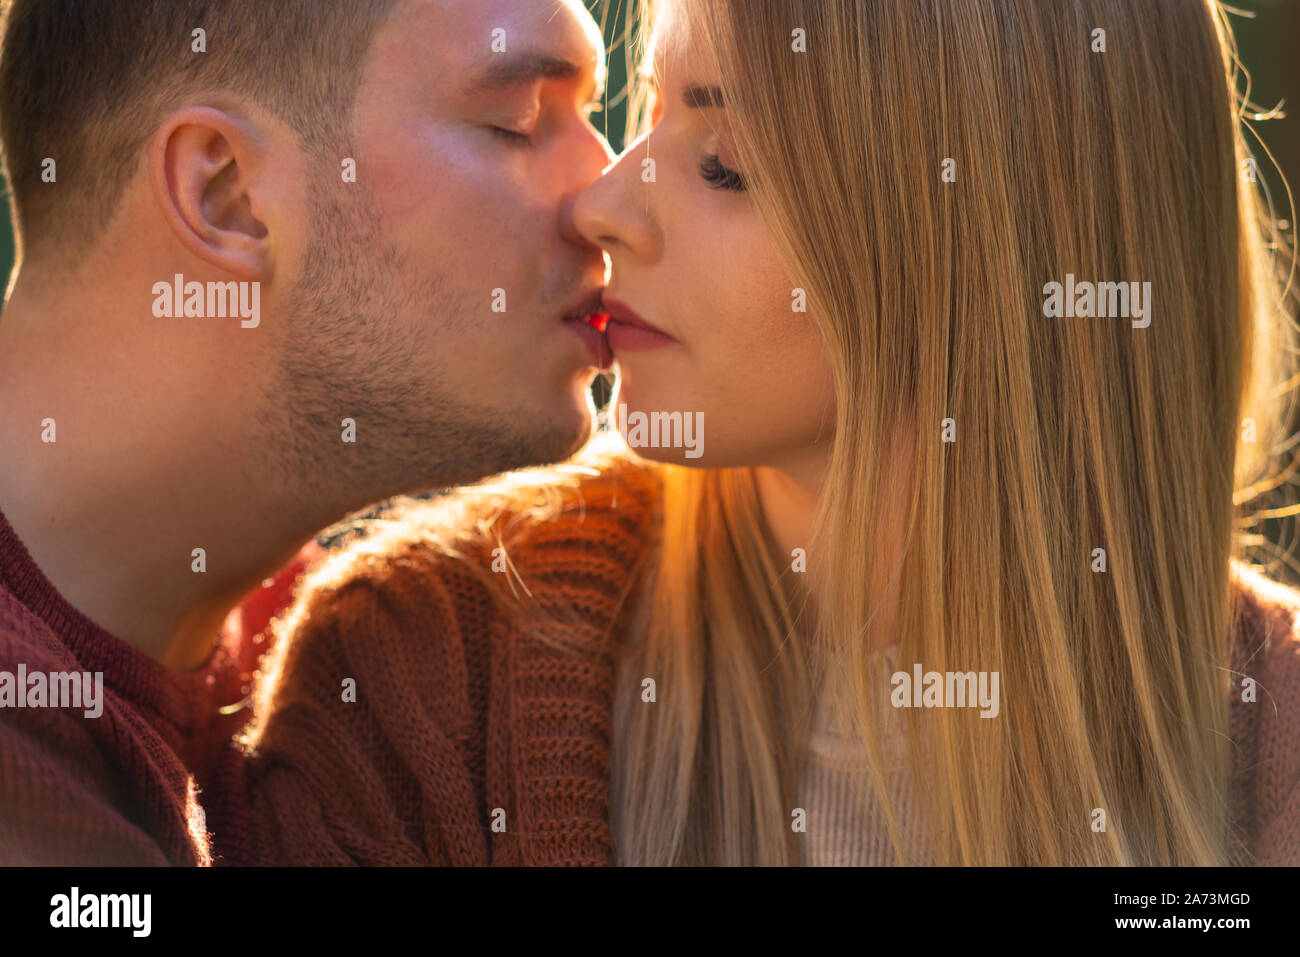 Young couple in love enjoying a tender kiss in a close up on their faces as their lips touch Stock Photo